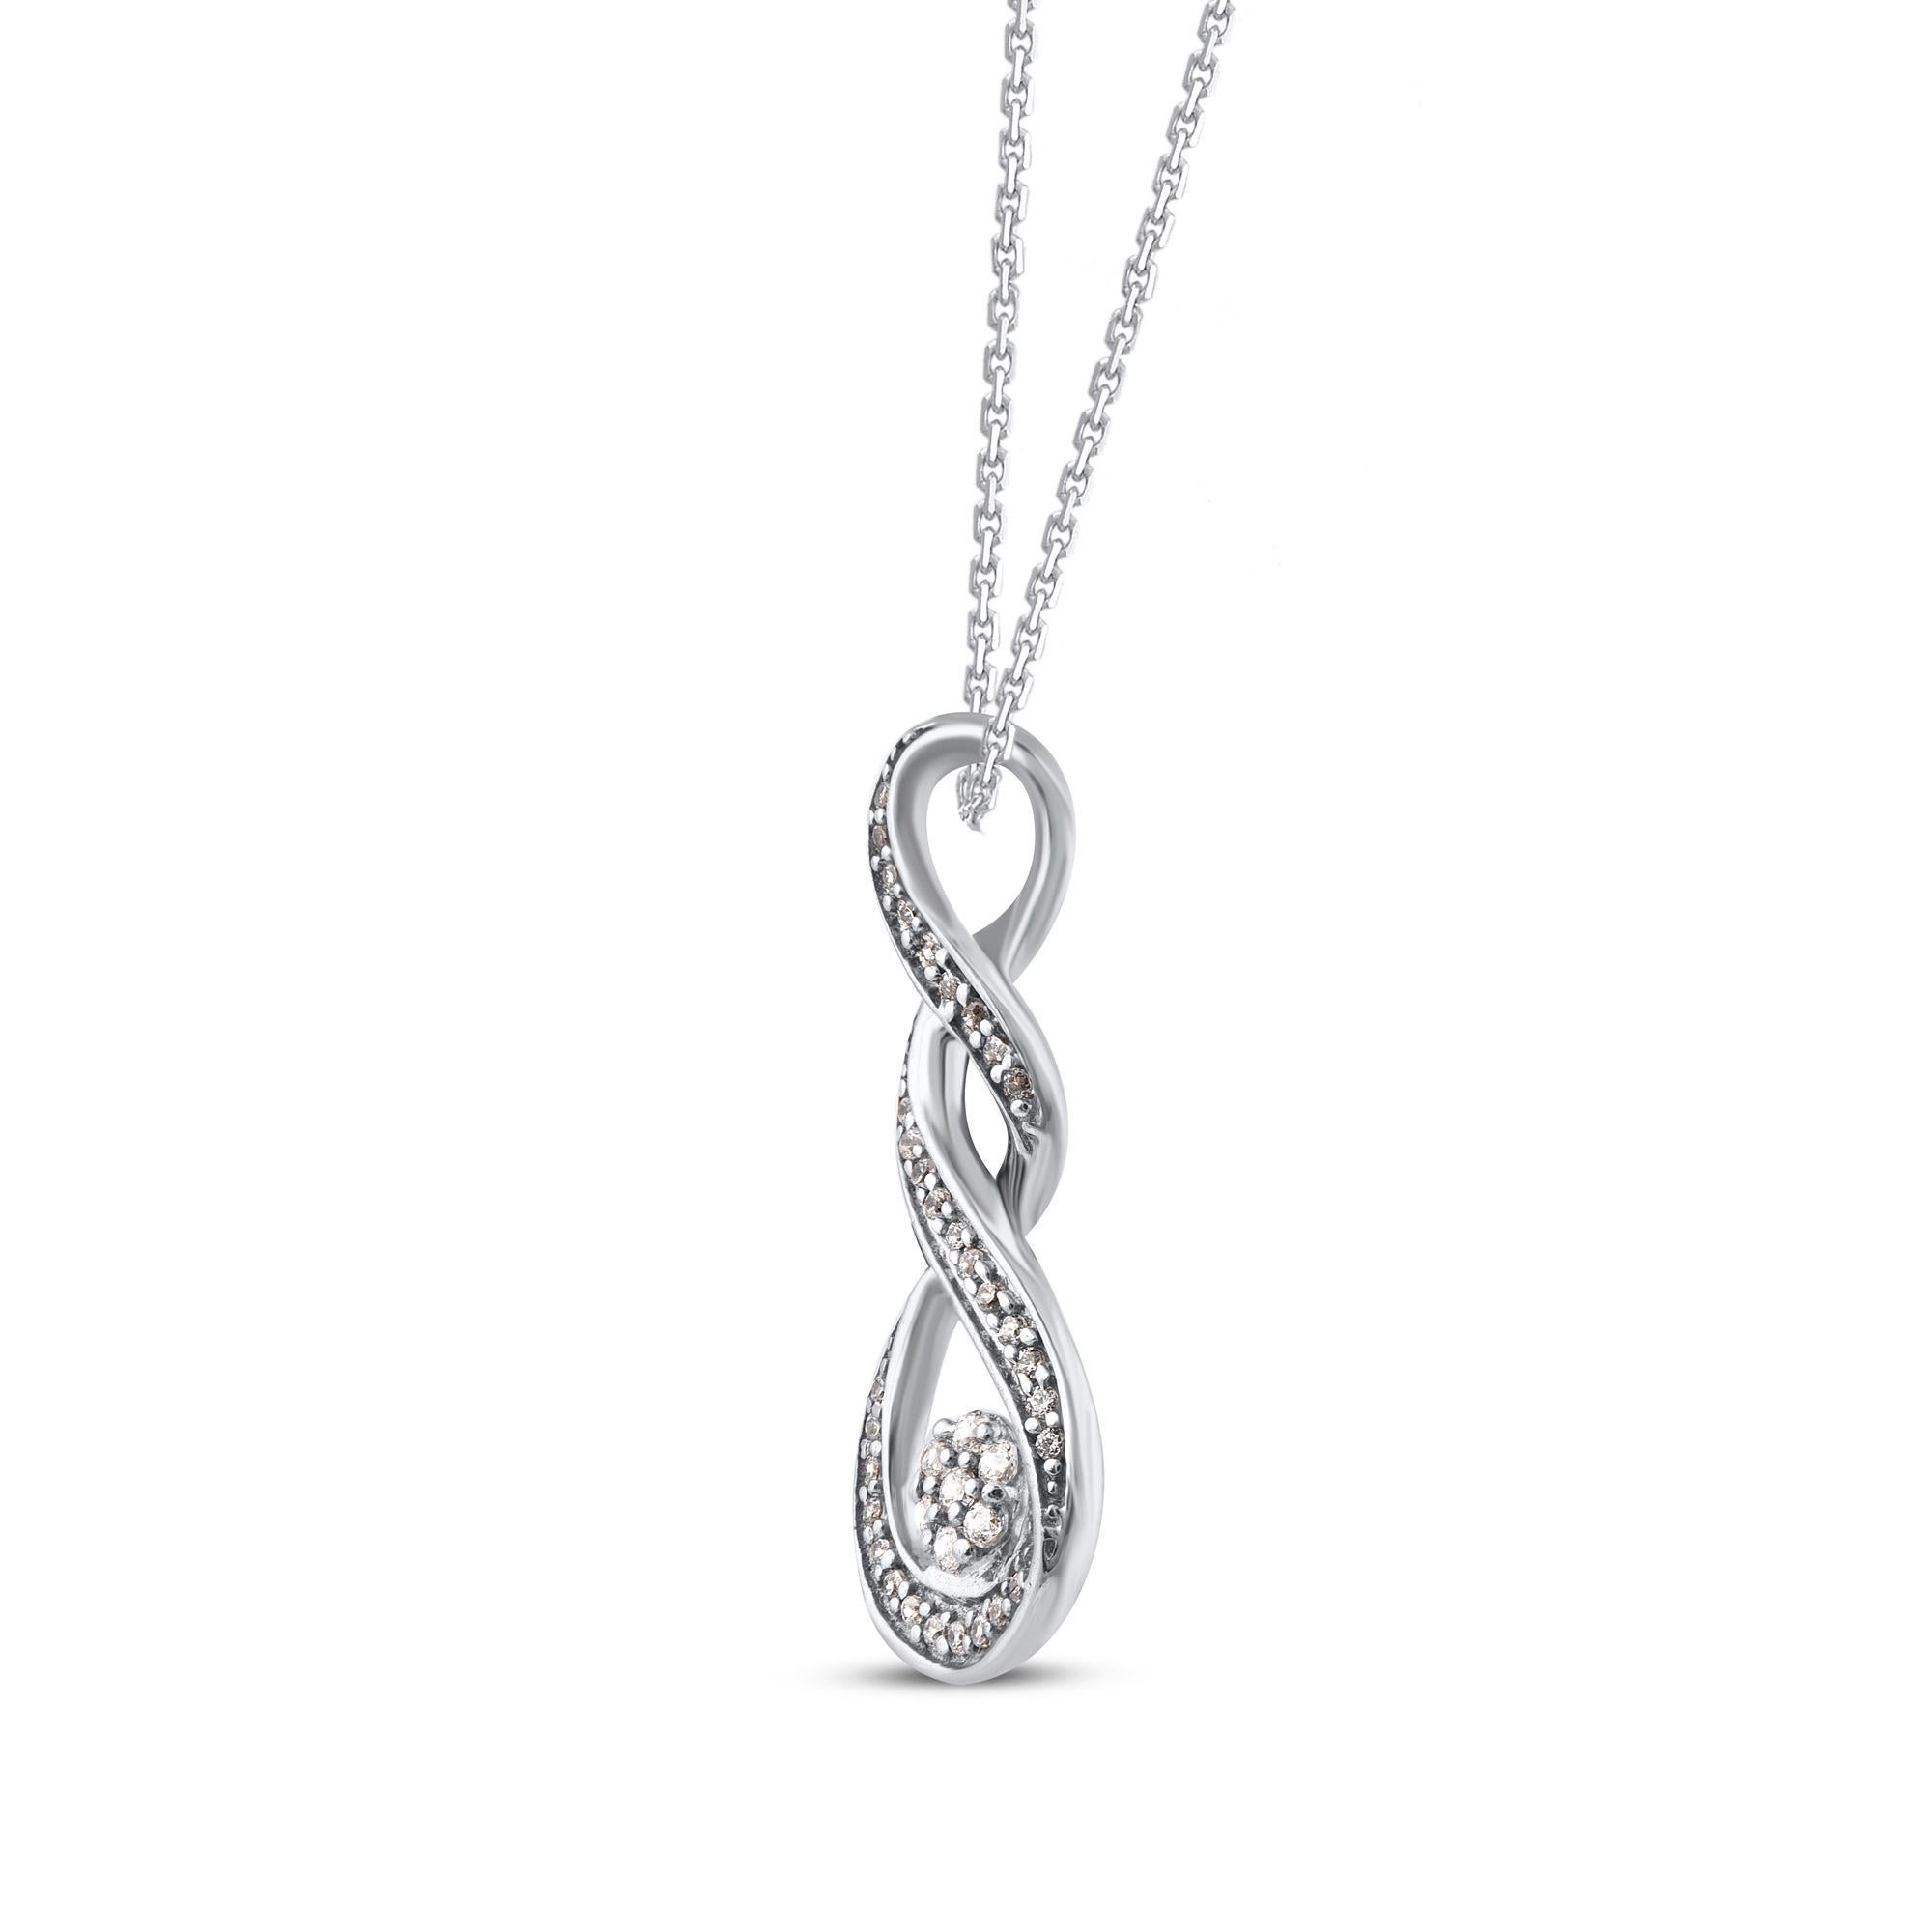 Bring charm to your look with this diamond pendant. The pendant is crafted from 14-karat white gold and features round single cut 39 white diamonds in prong & pave set, H-I color I2 clarity and a high polish finish complete the brilliant